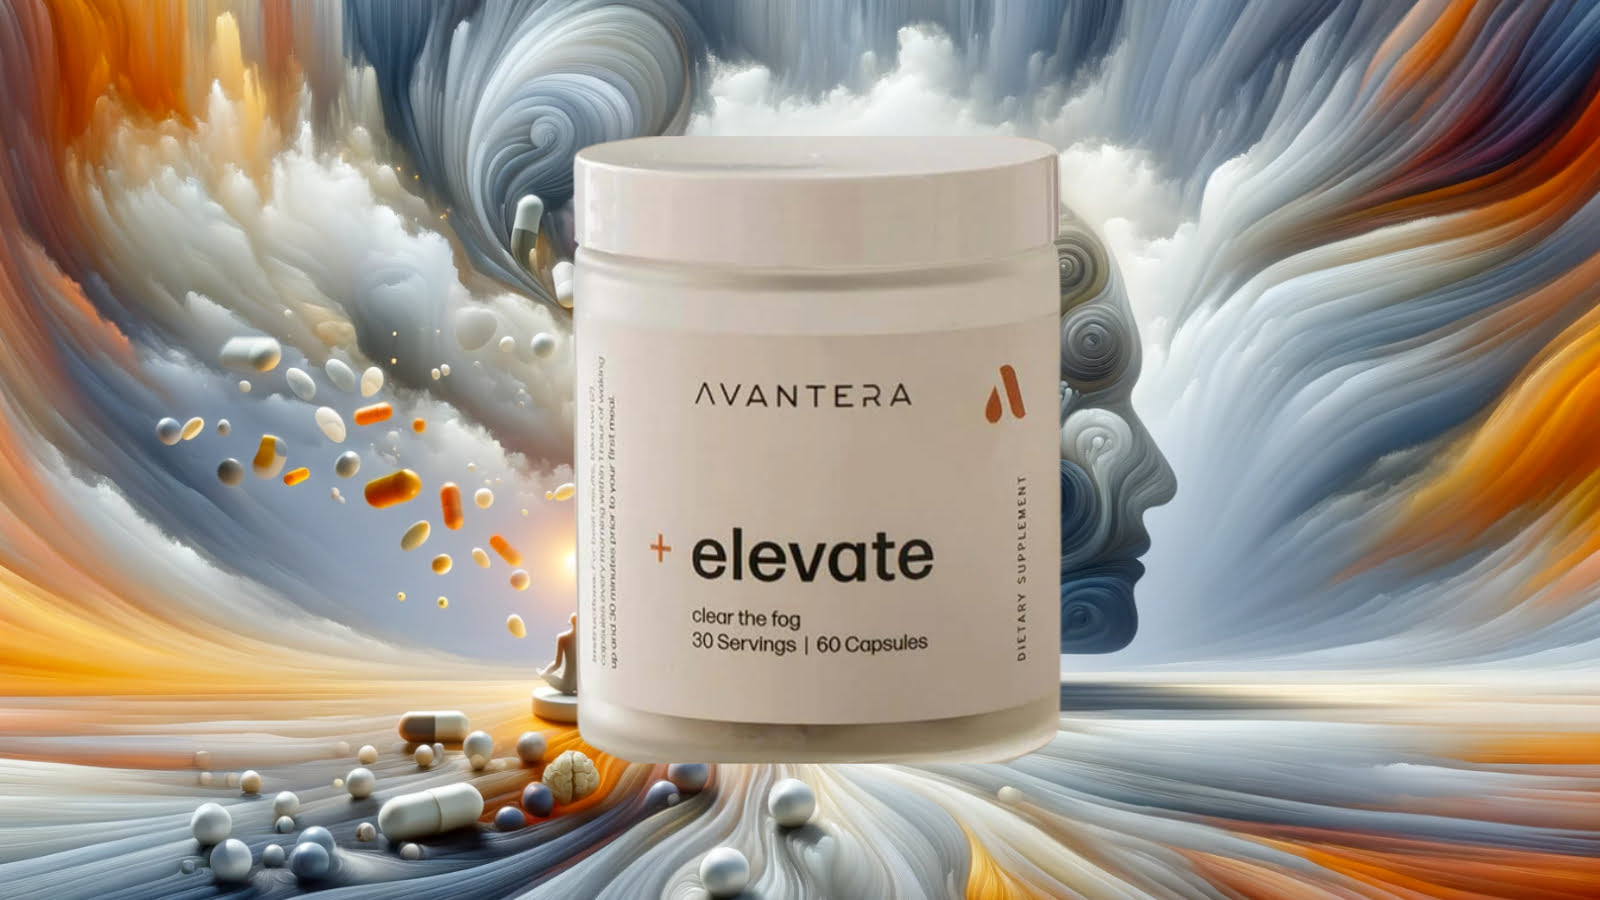 Review of Avantera Elevate's effectiveness and results in enhancing cognitive abilities.